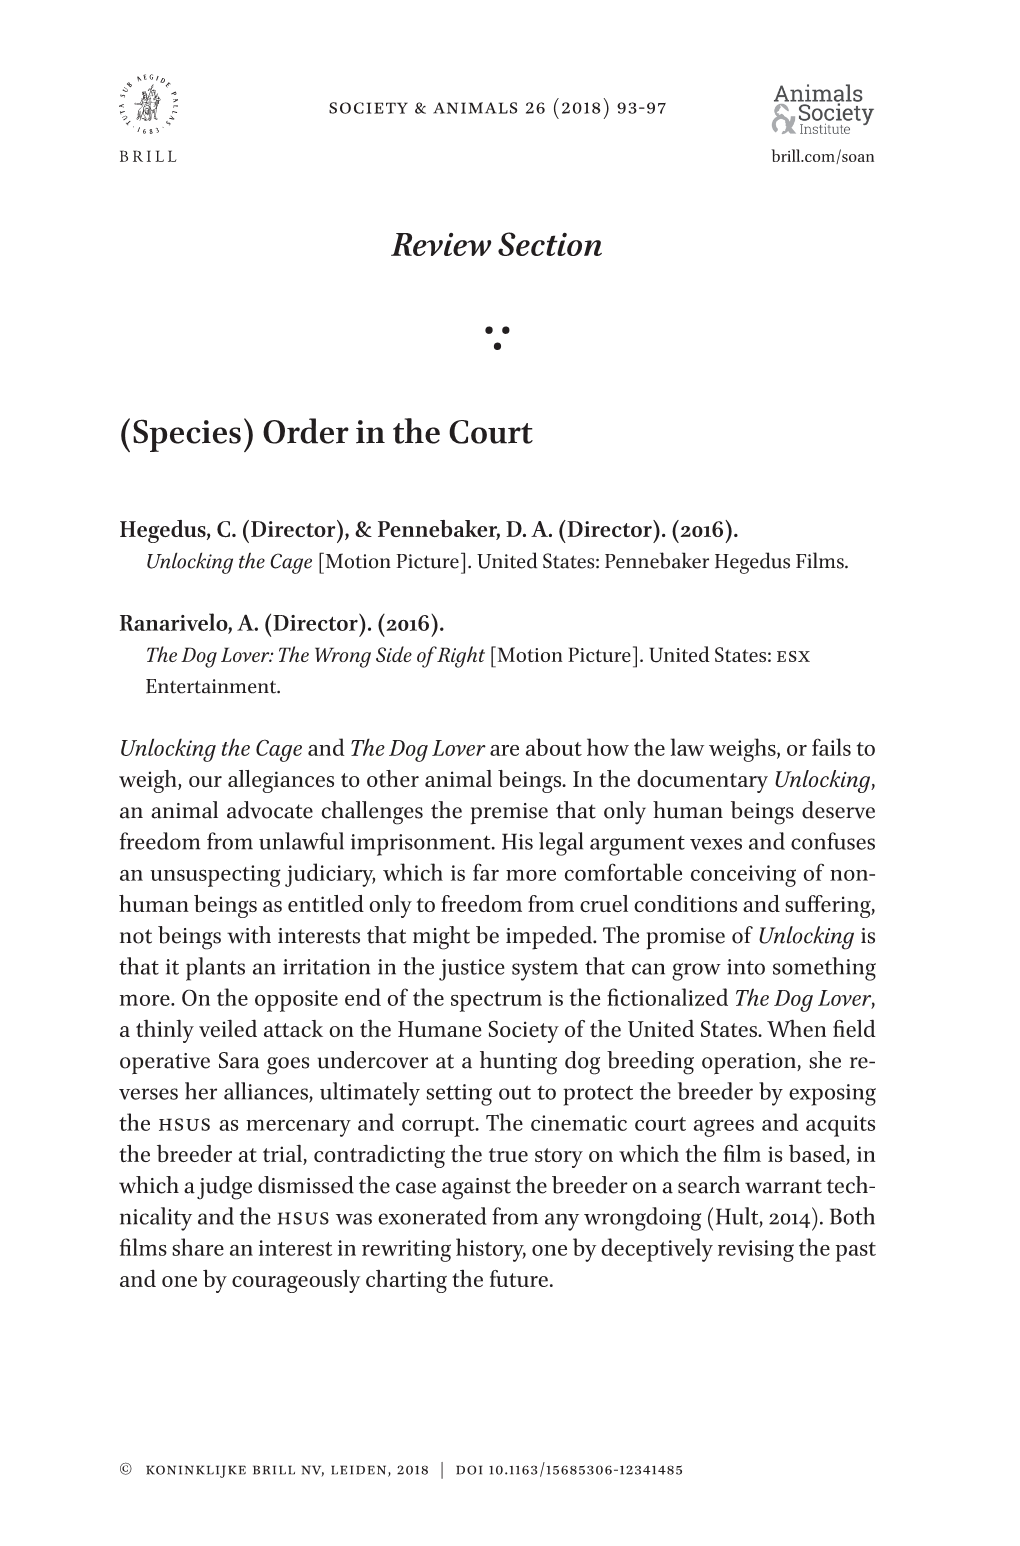 Review Section (Species) Order in the Court